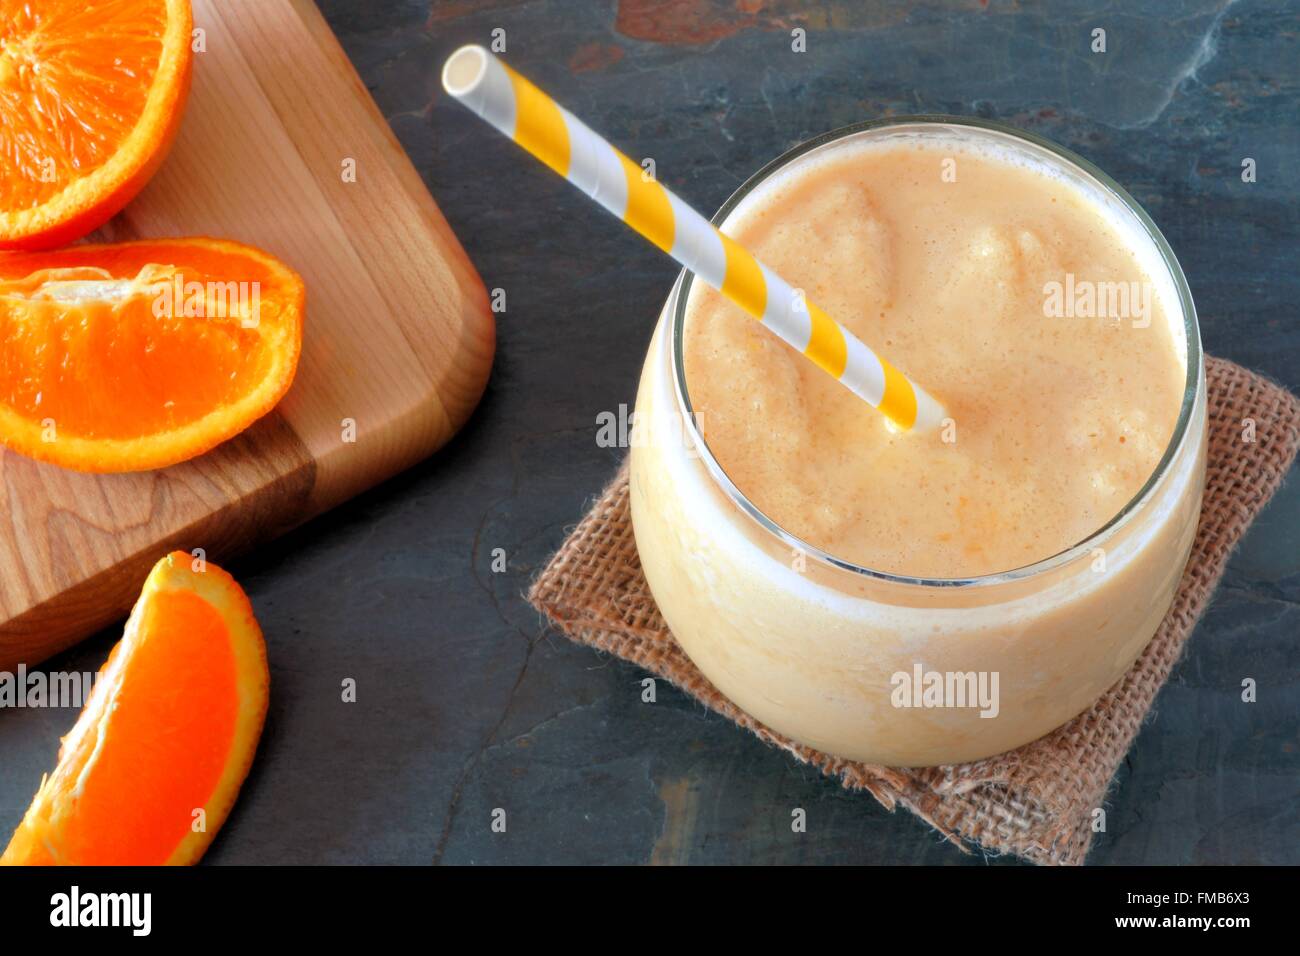 Healthy orange smoothie in a glass with striped straw and fresh fruit slices, downward view on slate Stock Photo